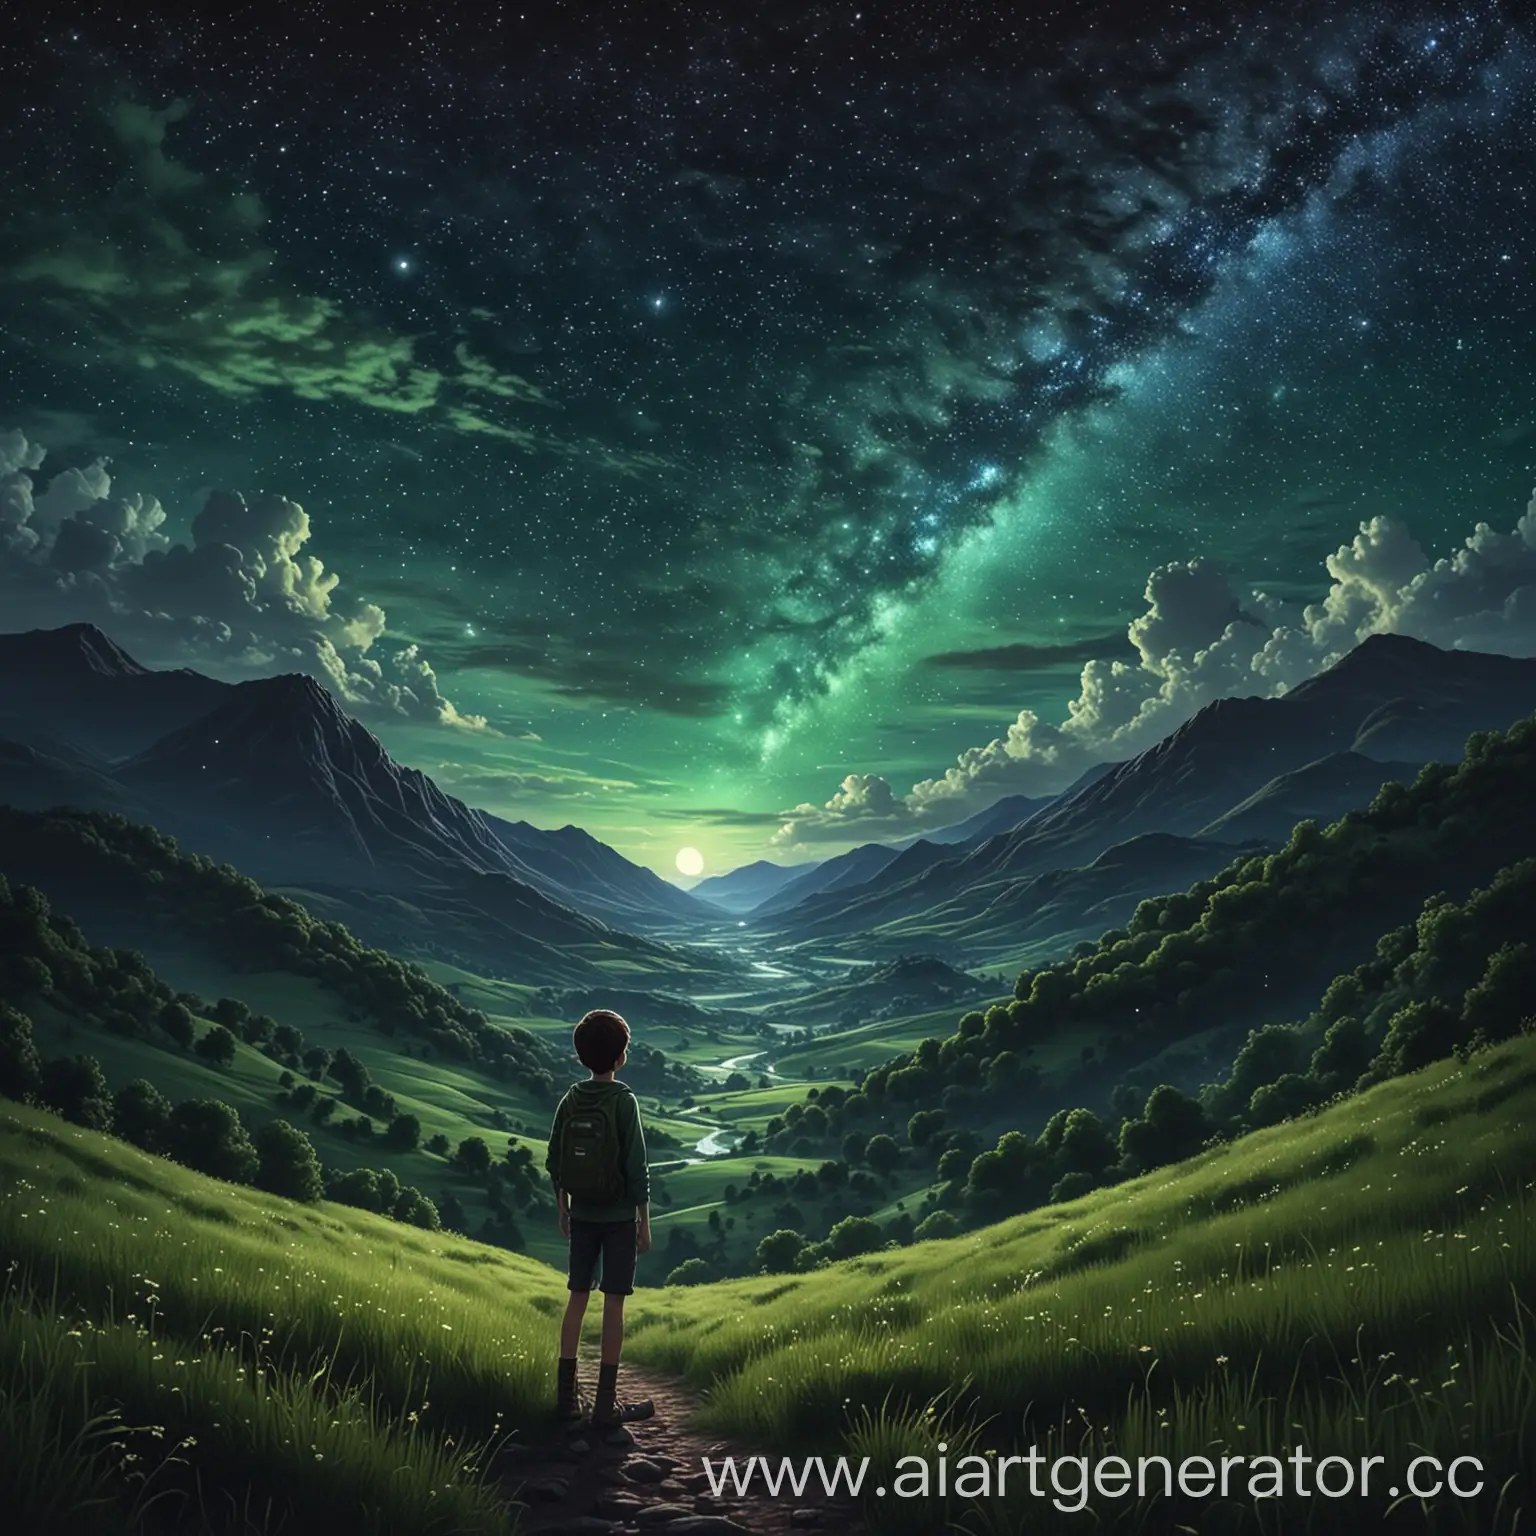 Lonely-Boy-Contemplating-Starlit-Night-on-Green-Hill